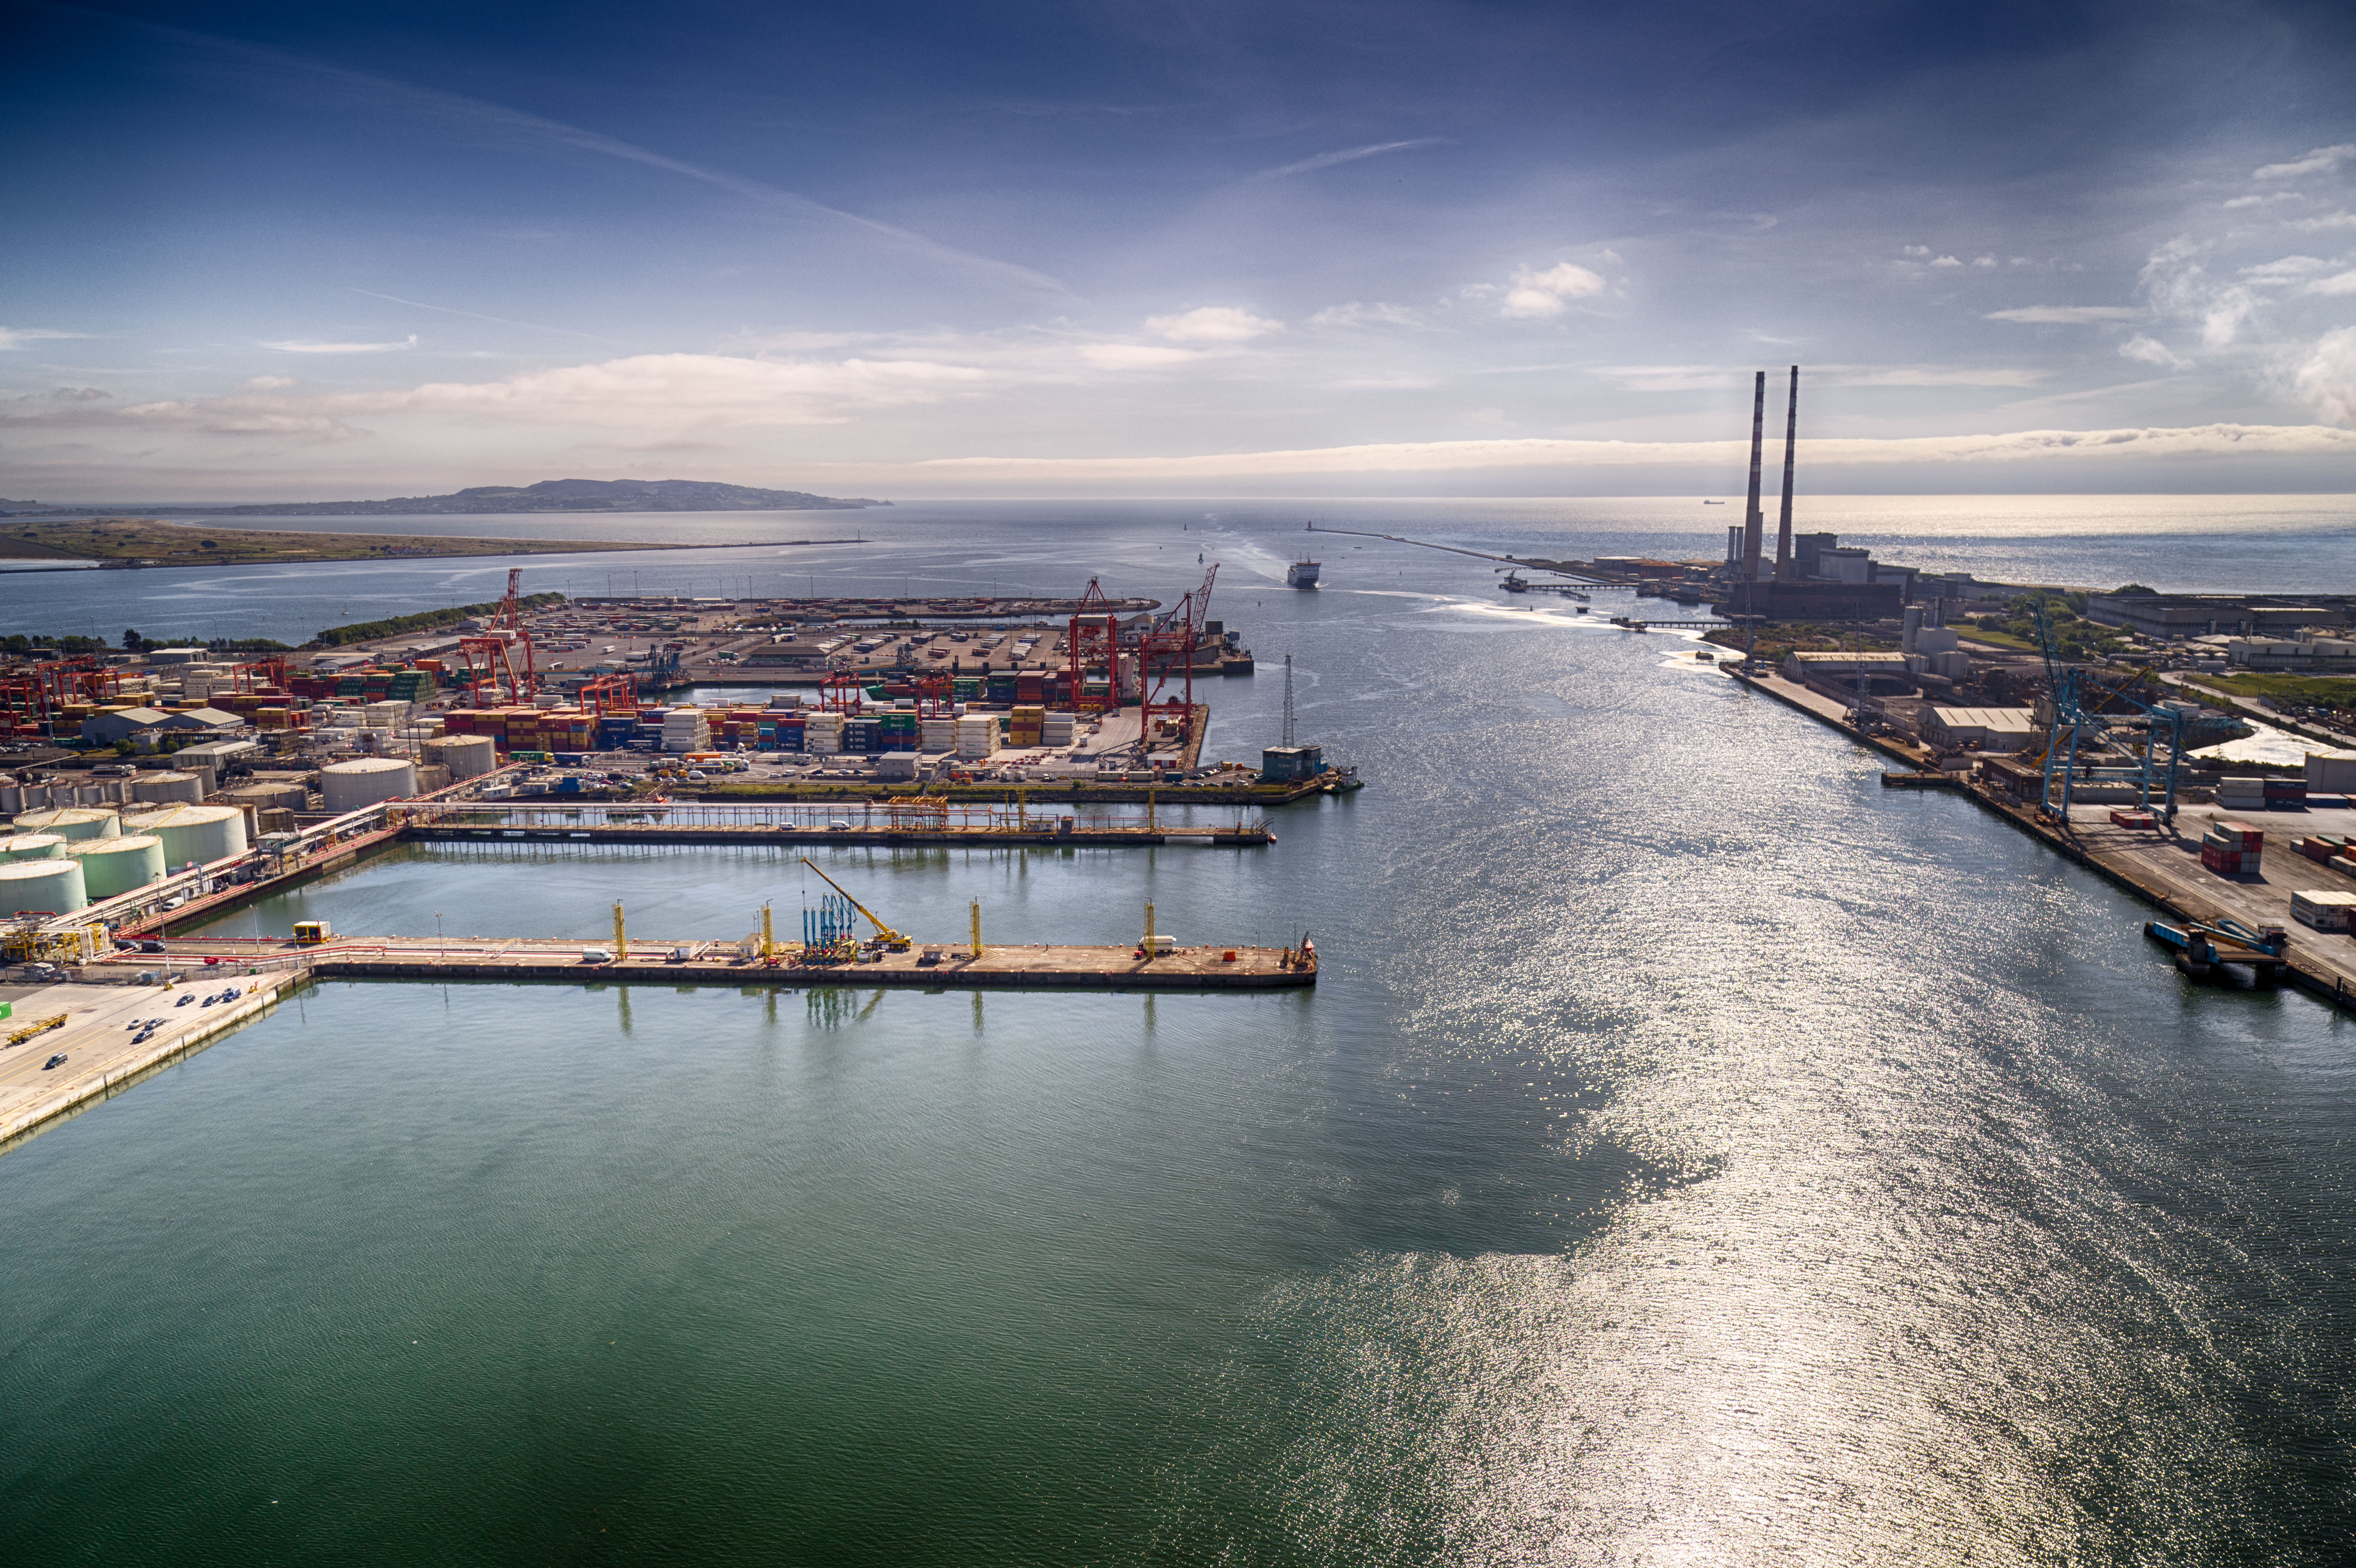 Dublin Port Throughput declines by - 10.9% in the six months to June